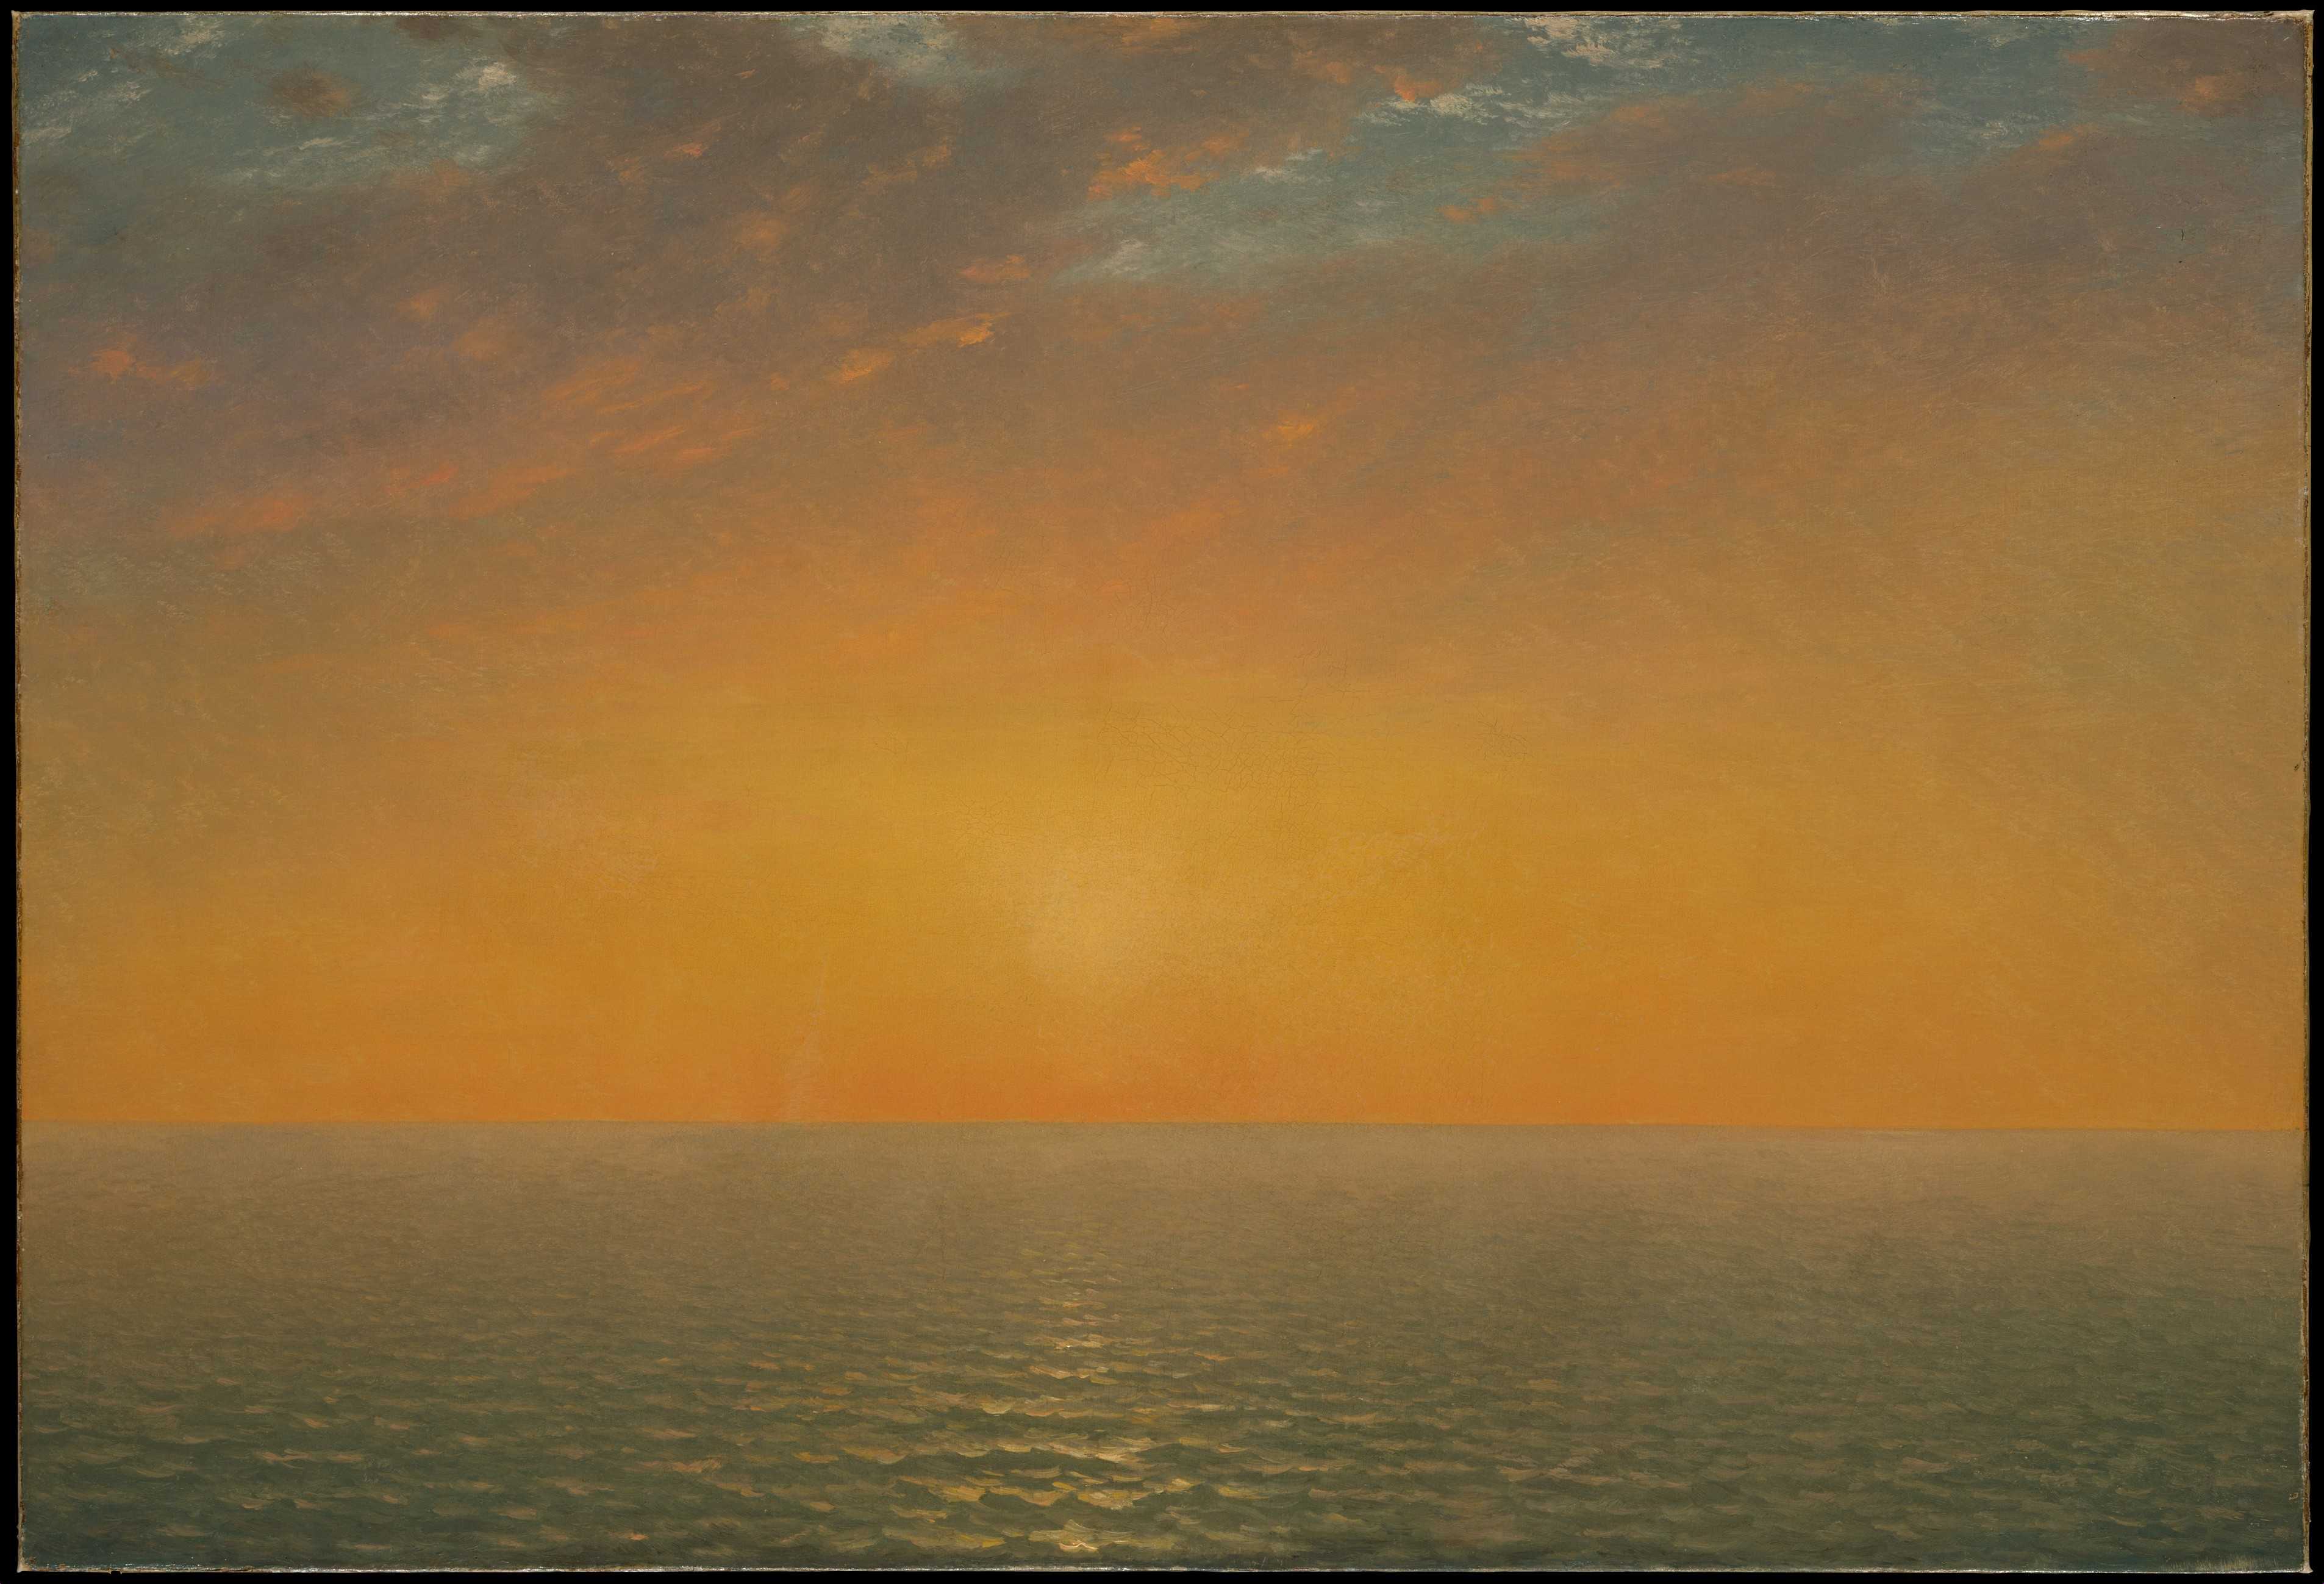 Find out more about John Frederick Kensett - Sunset on the Sea